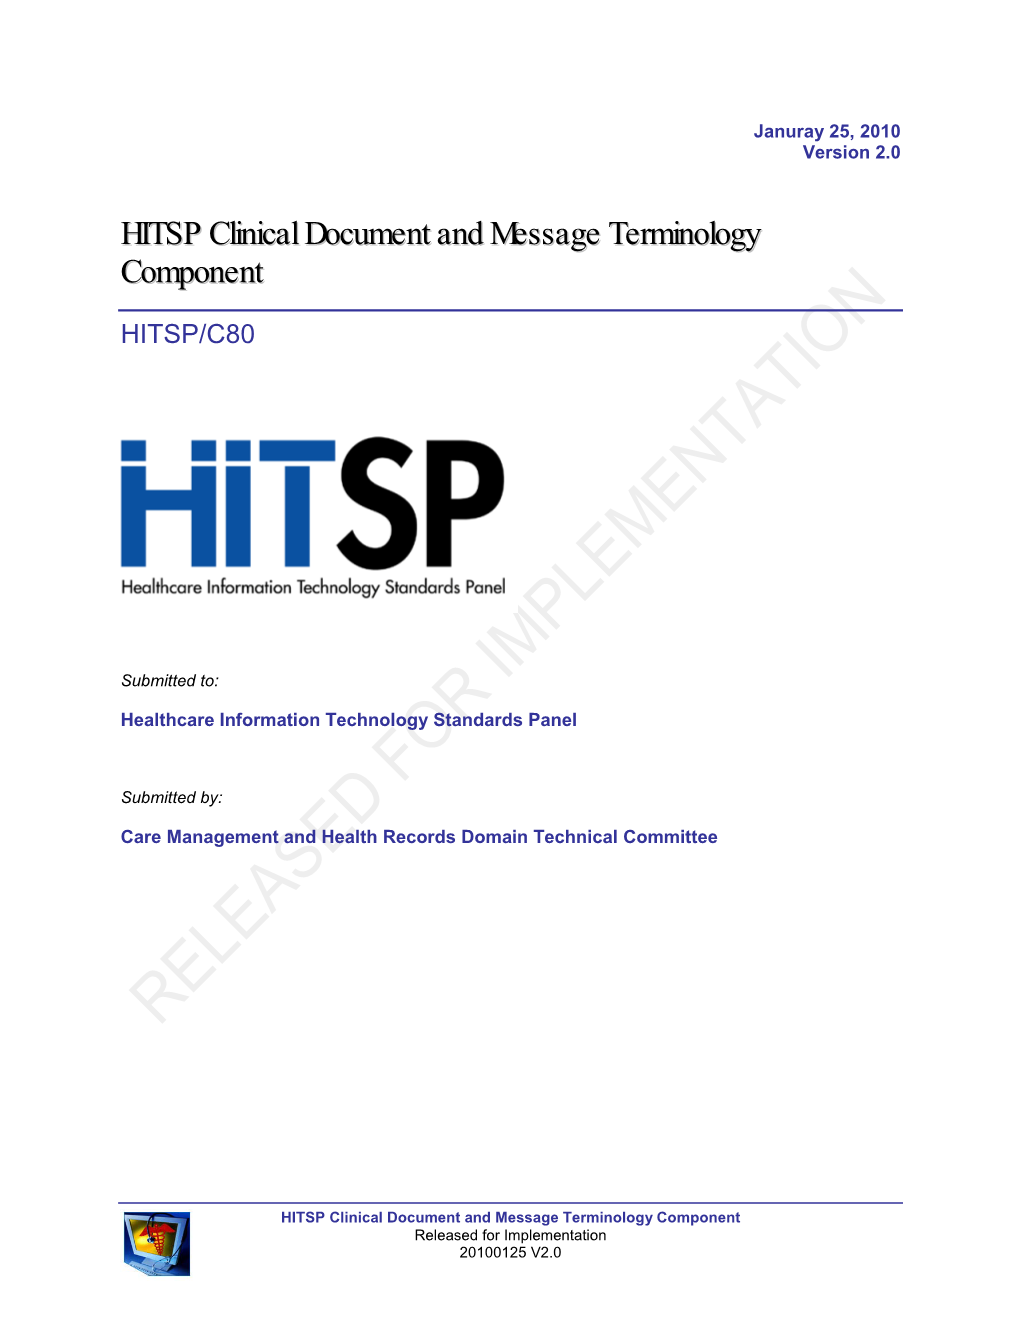 C80: HITSP Clinical Document and Message Terminology Component